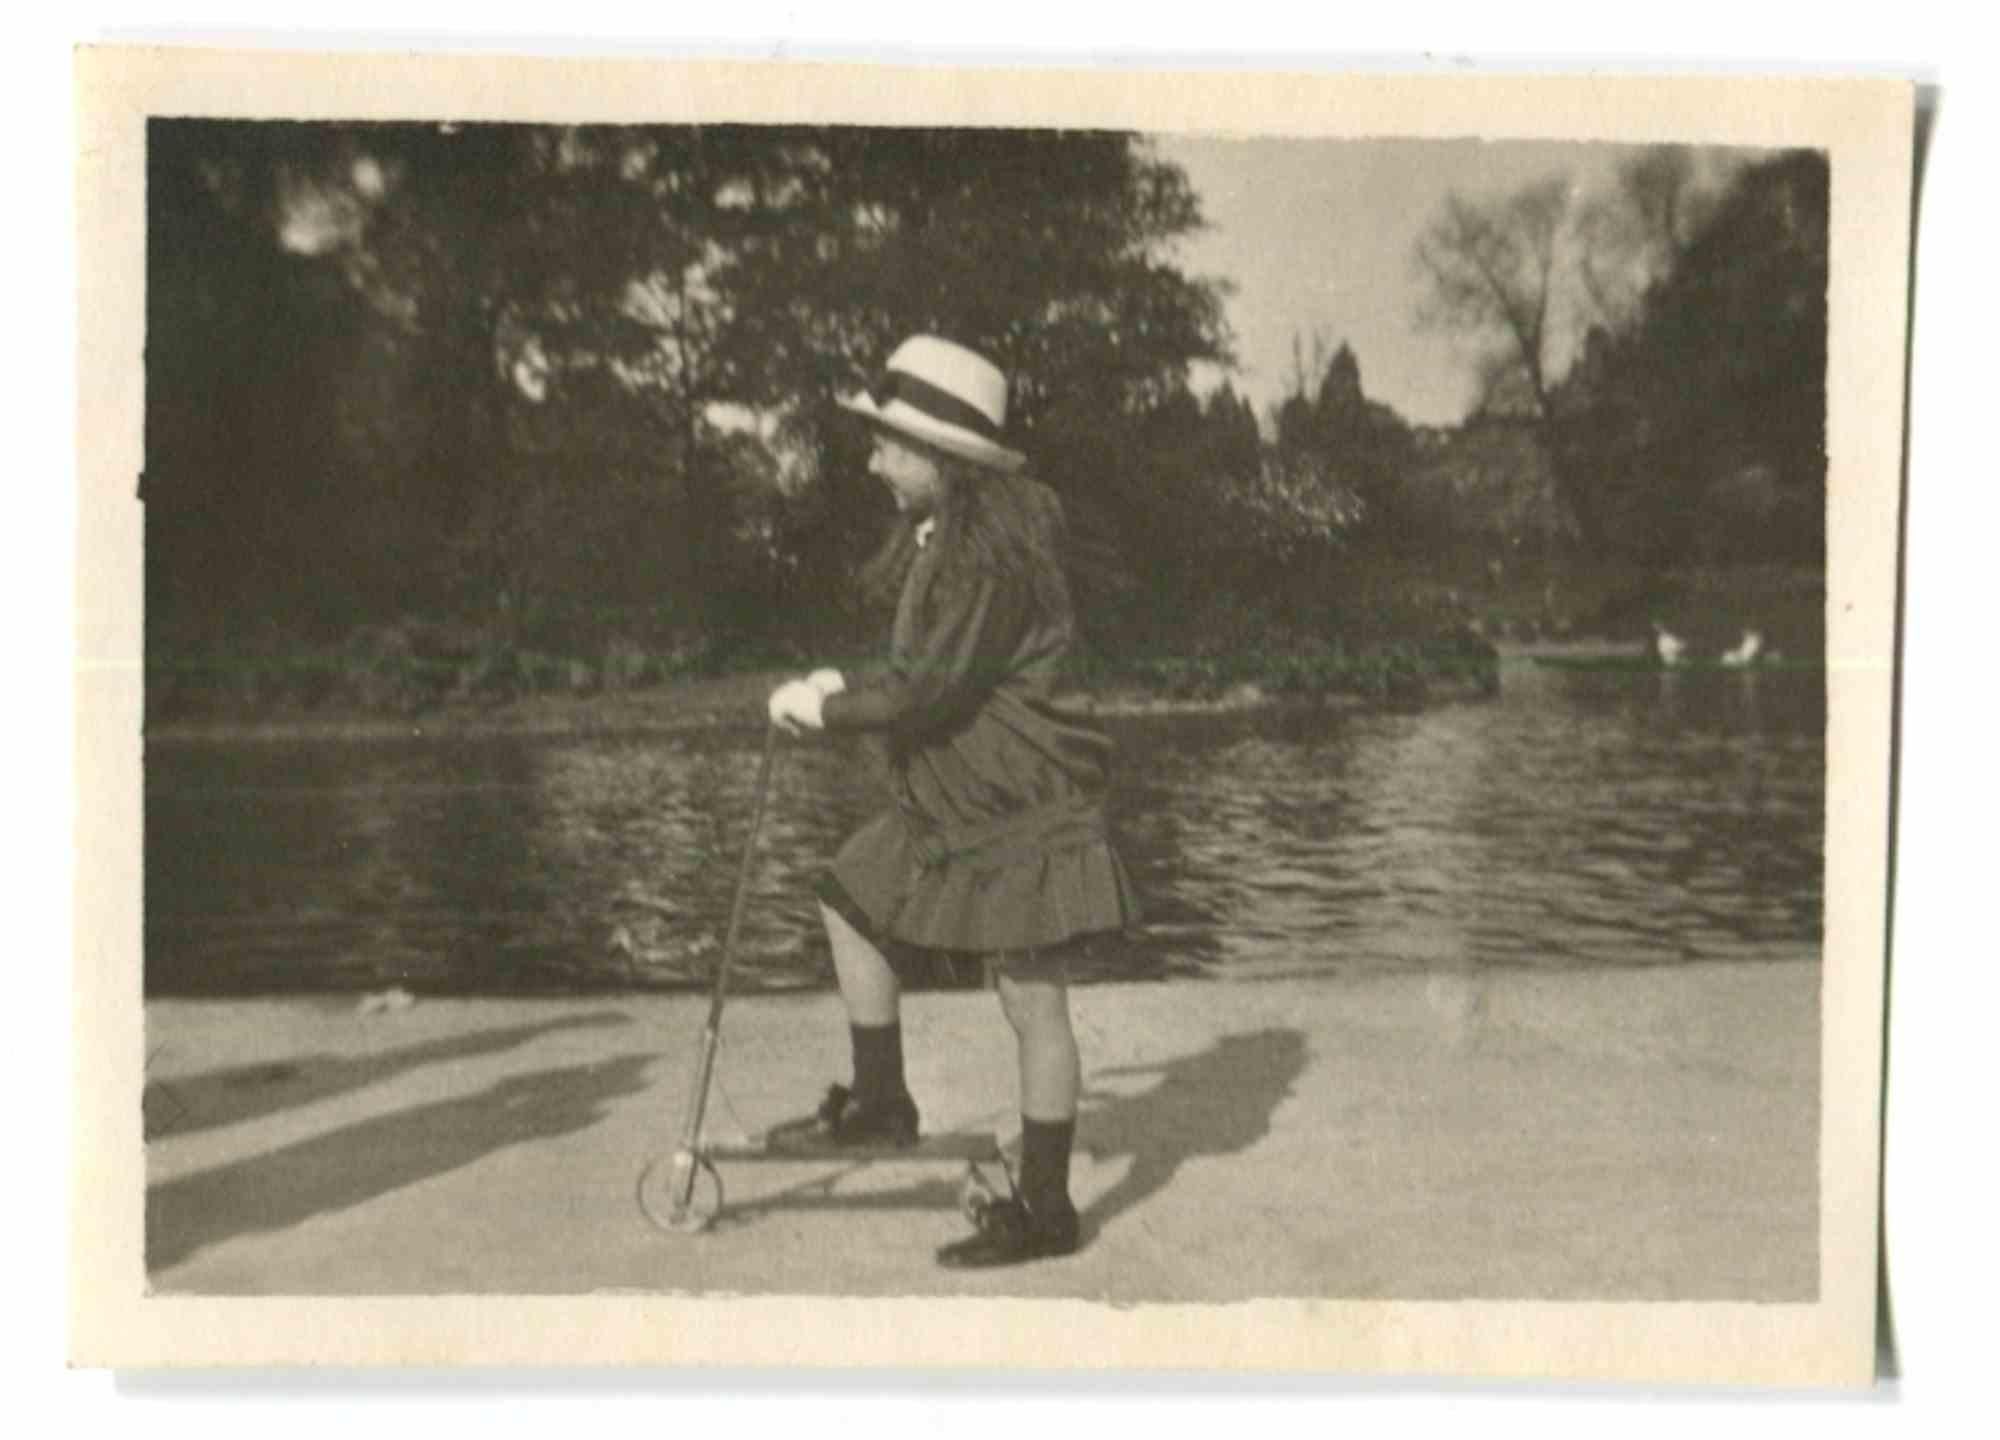 Unknown Figurative Photograph – Old Days - Little Girl Playing - Vintage-Foto, frühes 20. Jahrhundert